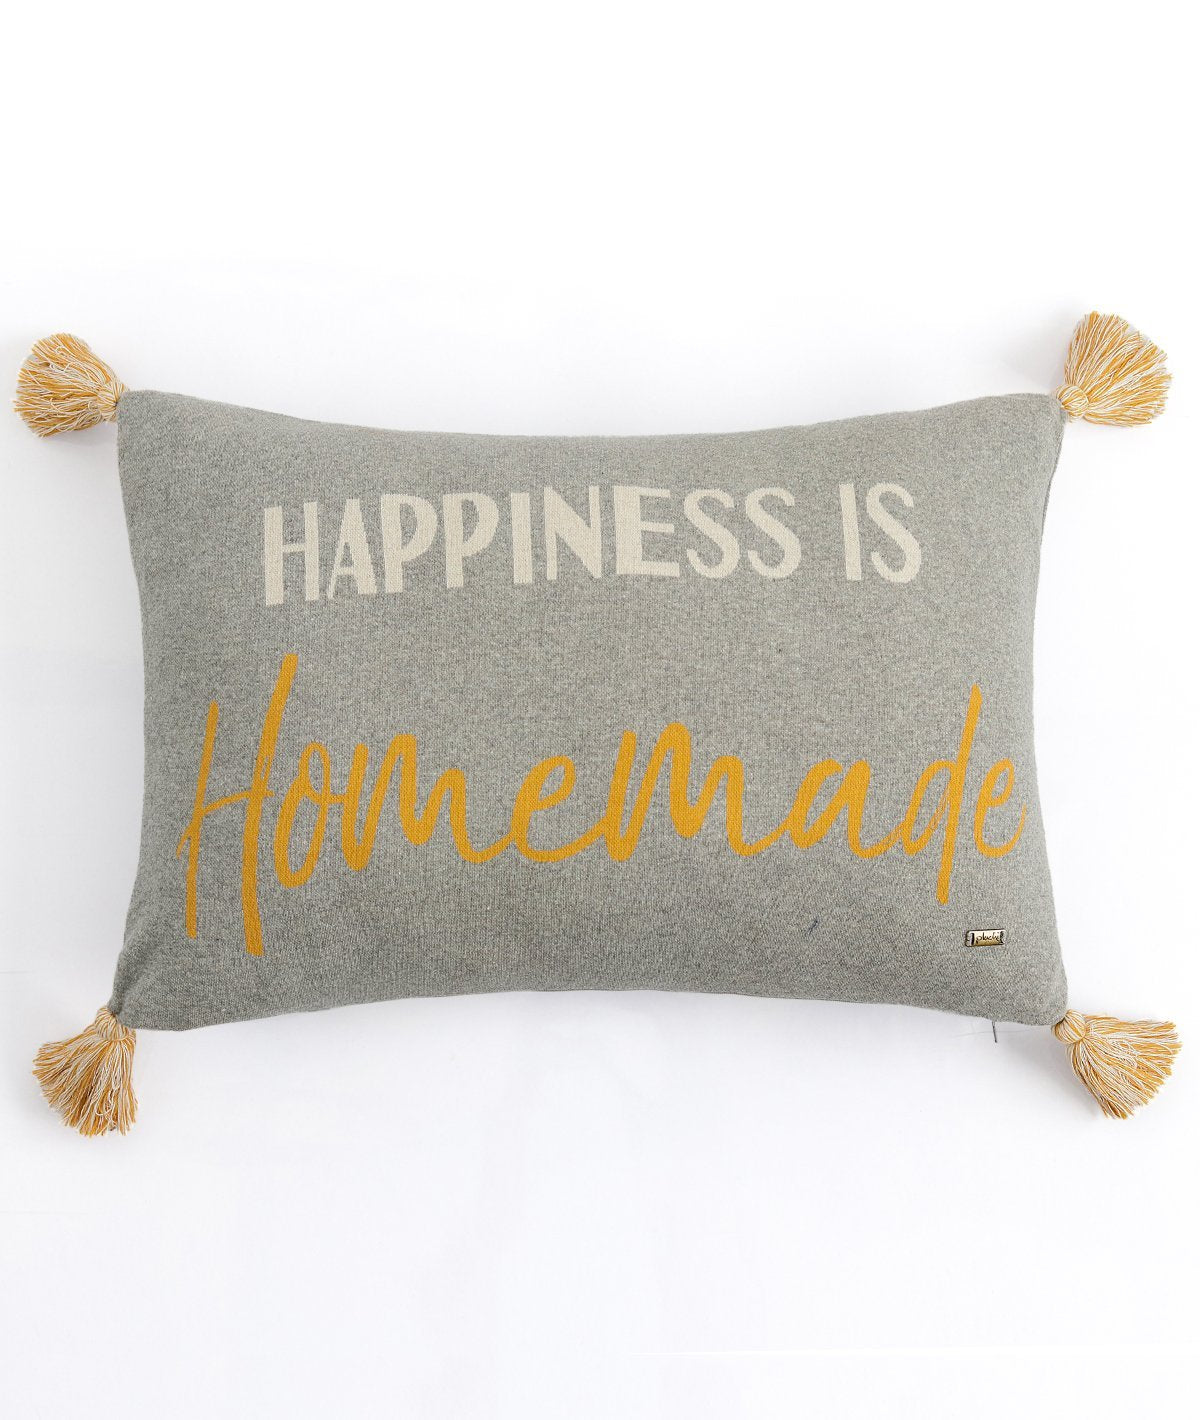 Happiness Is Homemade Cotton Knitted Decorative Light Grey Color 16 x 24 Inches Pillow Covers